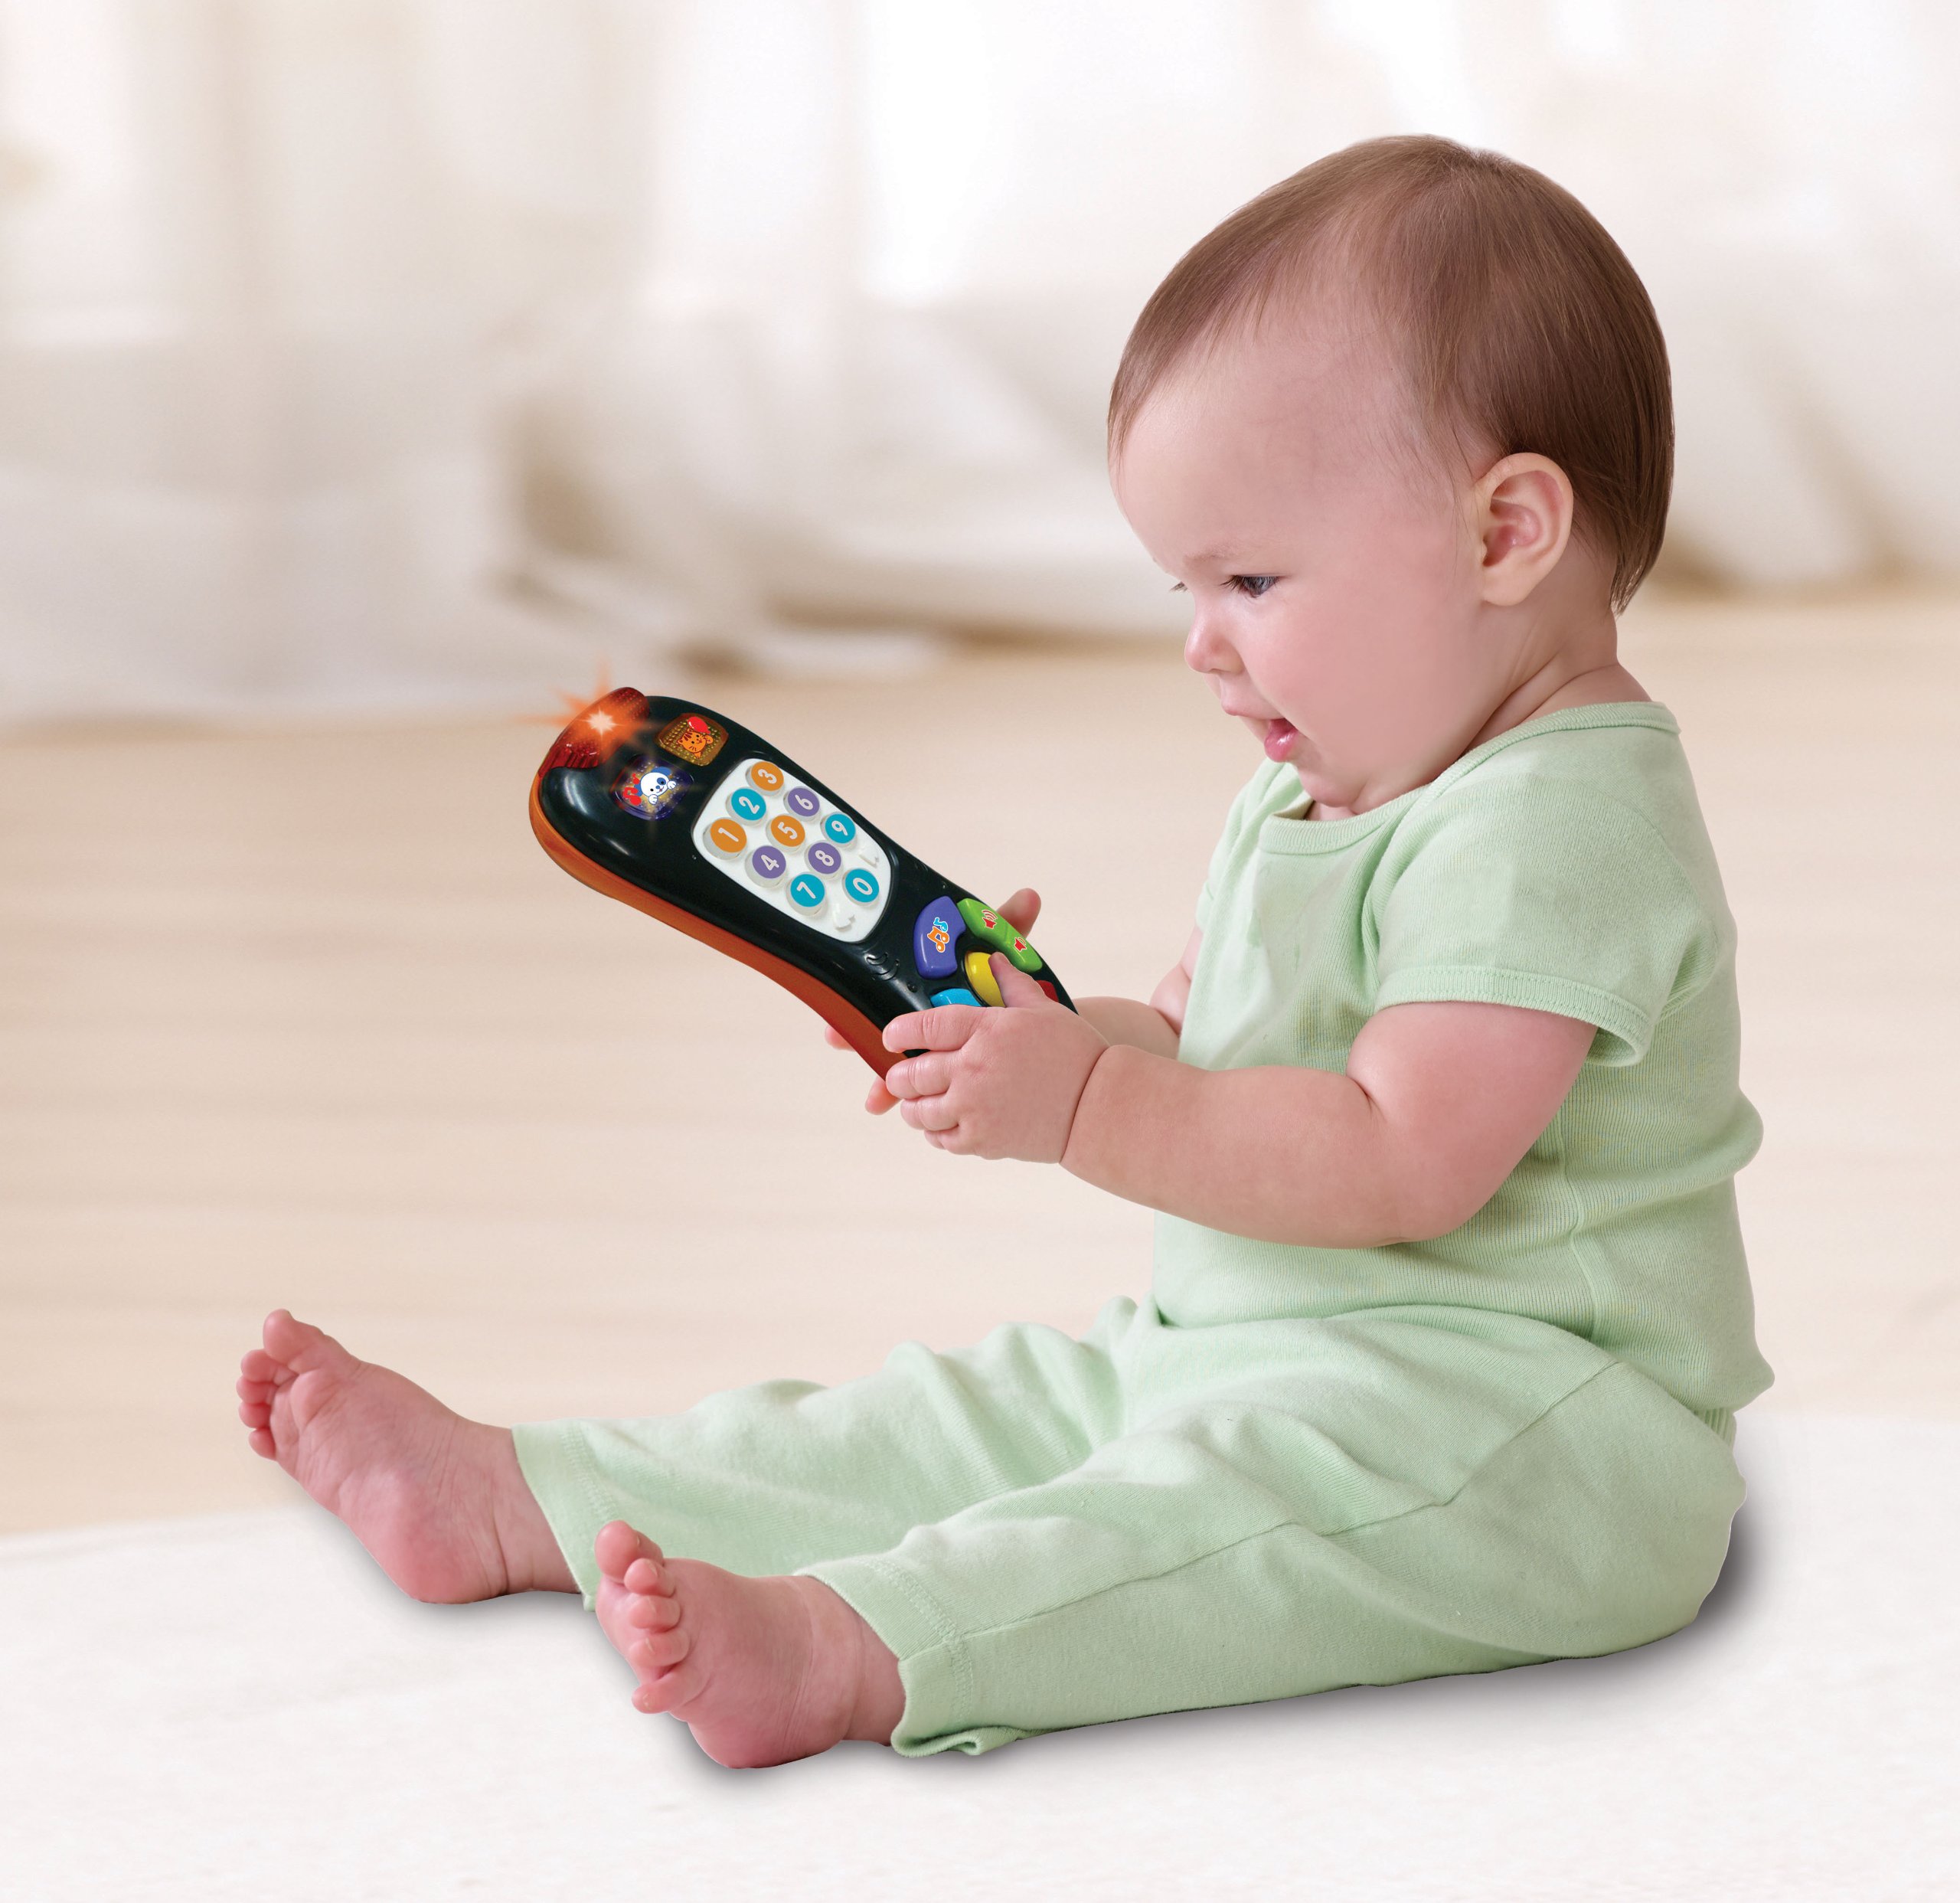 VTech Click and Count Remote, Black